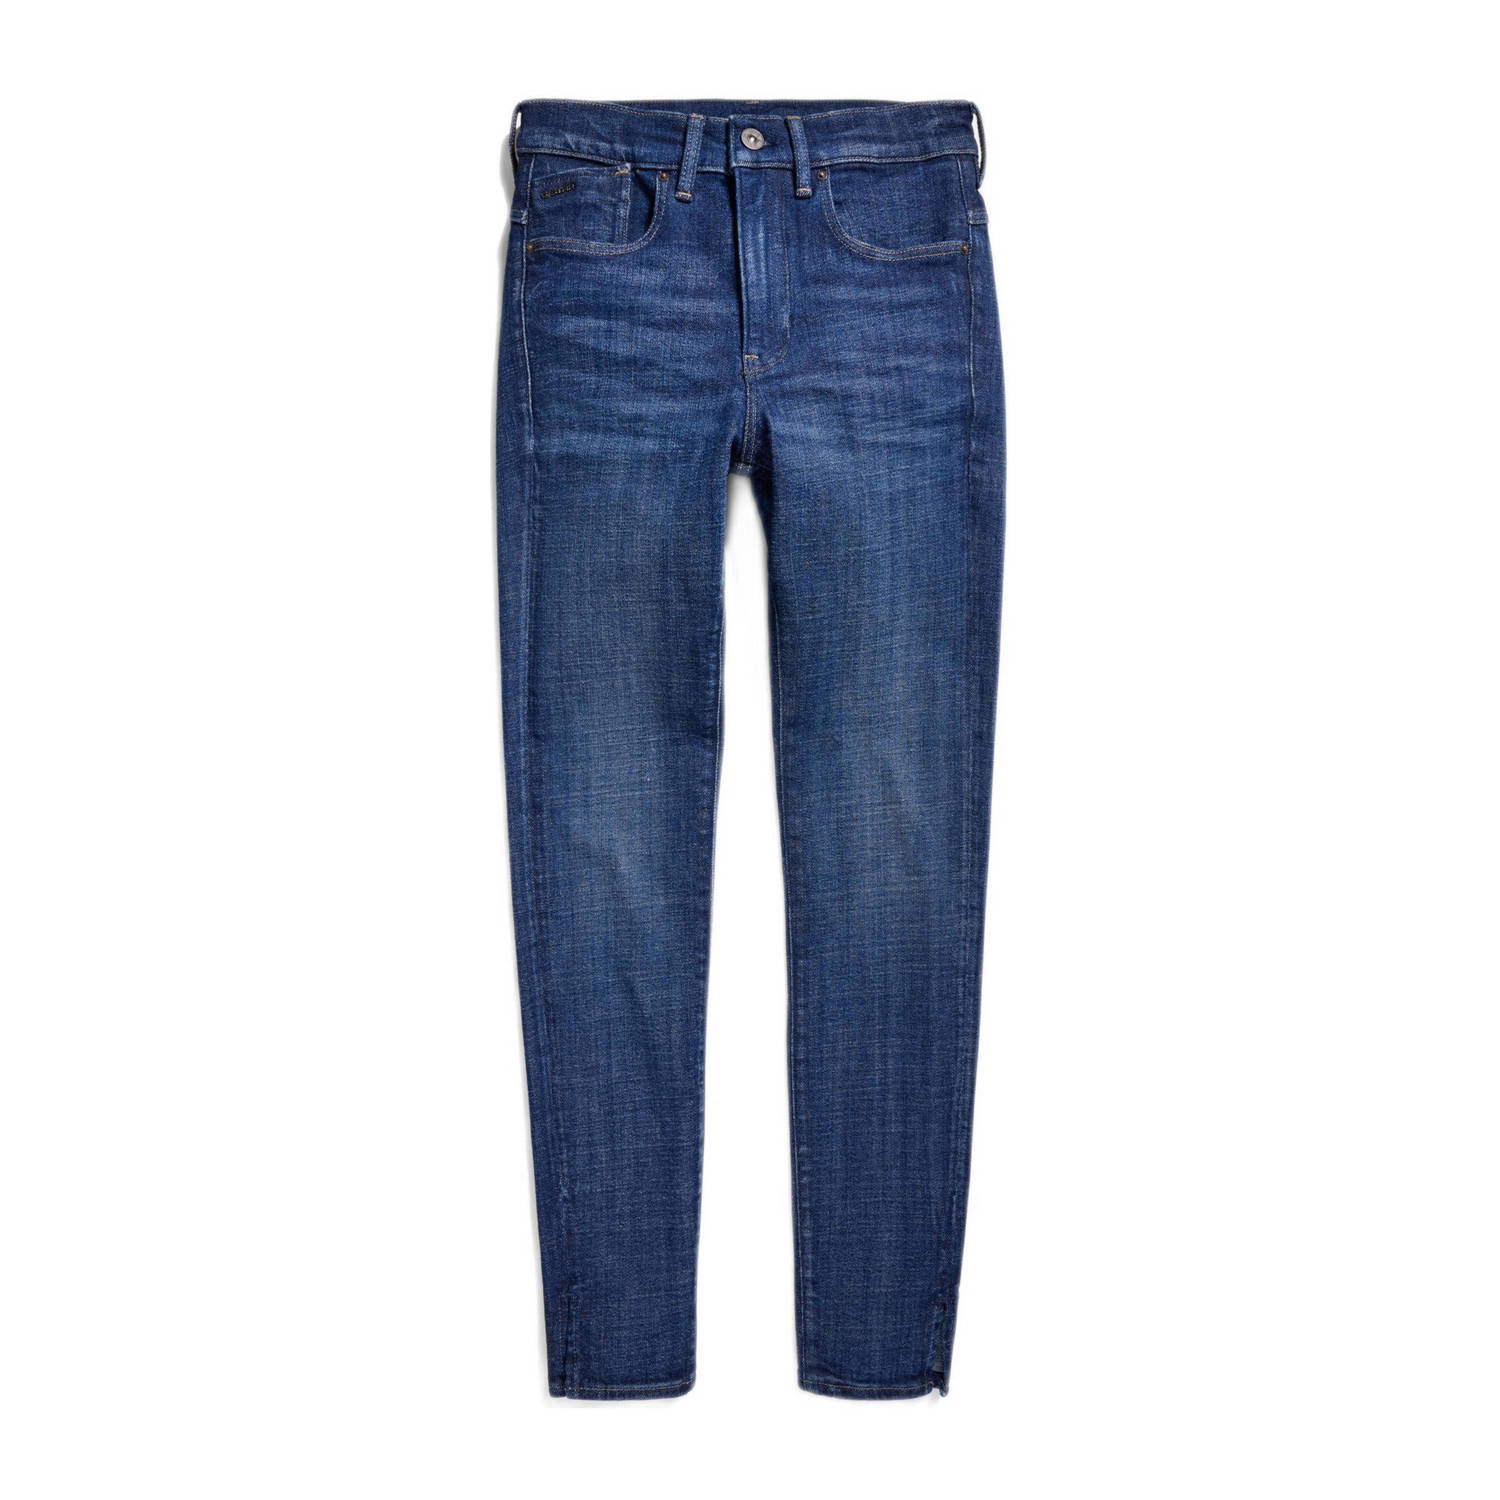 G-Star RAW Lhana high waist skinny jeans faded blue copen